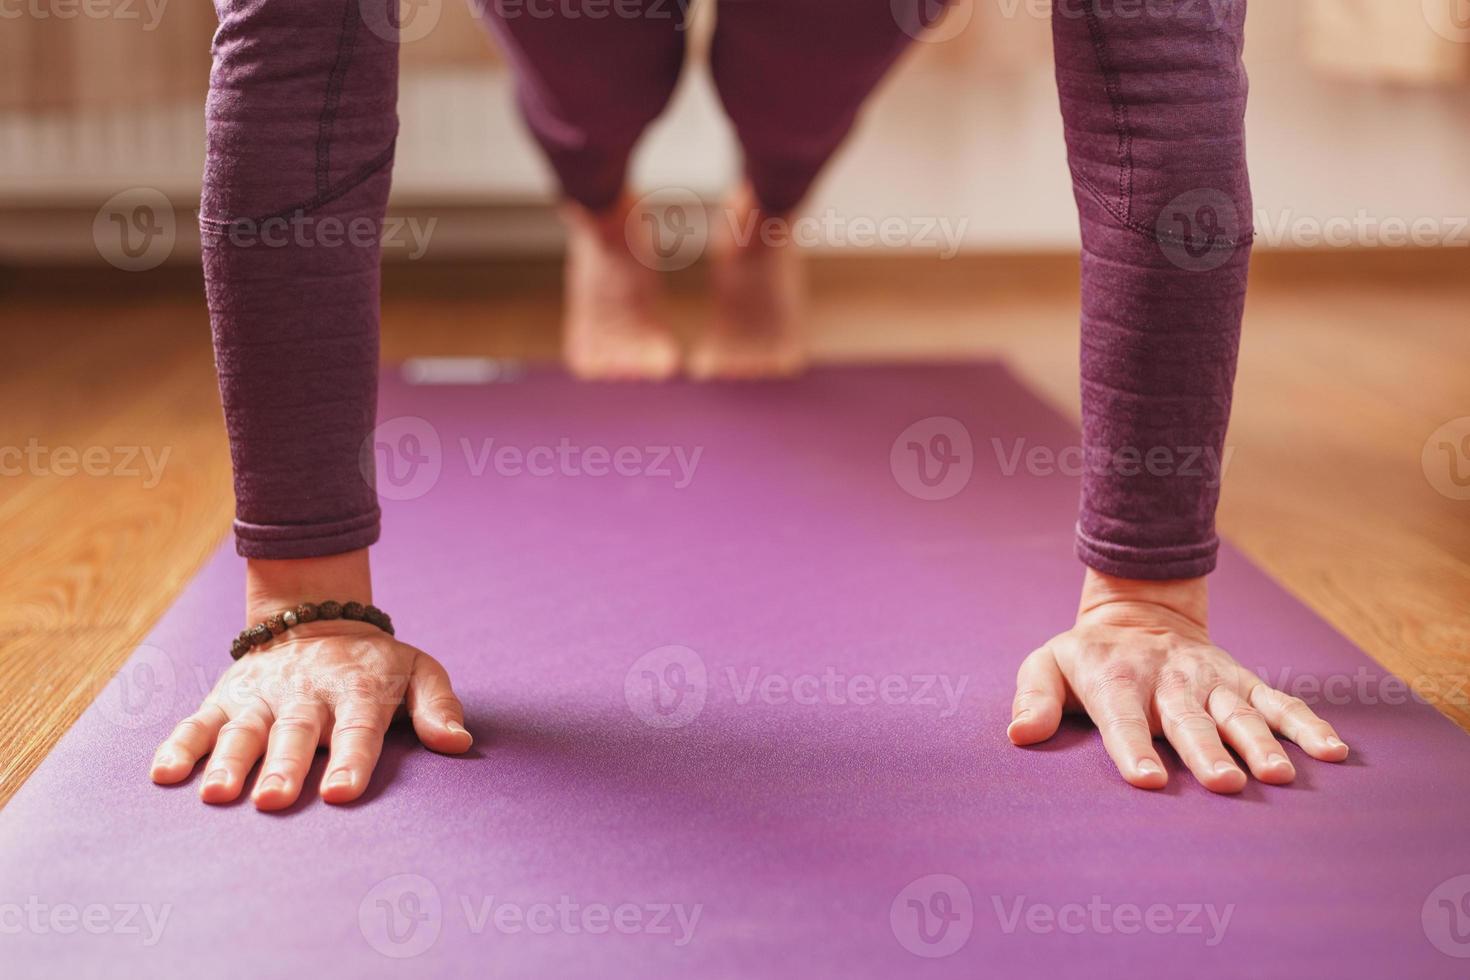 A girl does yoga asanas on a lilac rug in the living room photo